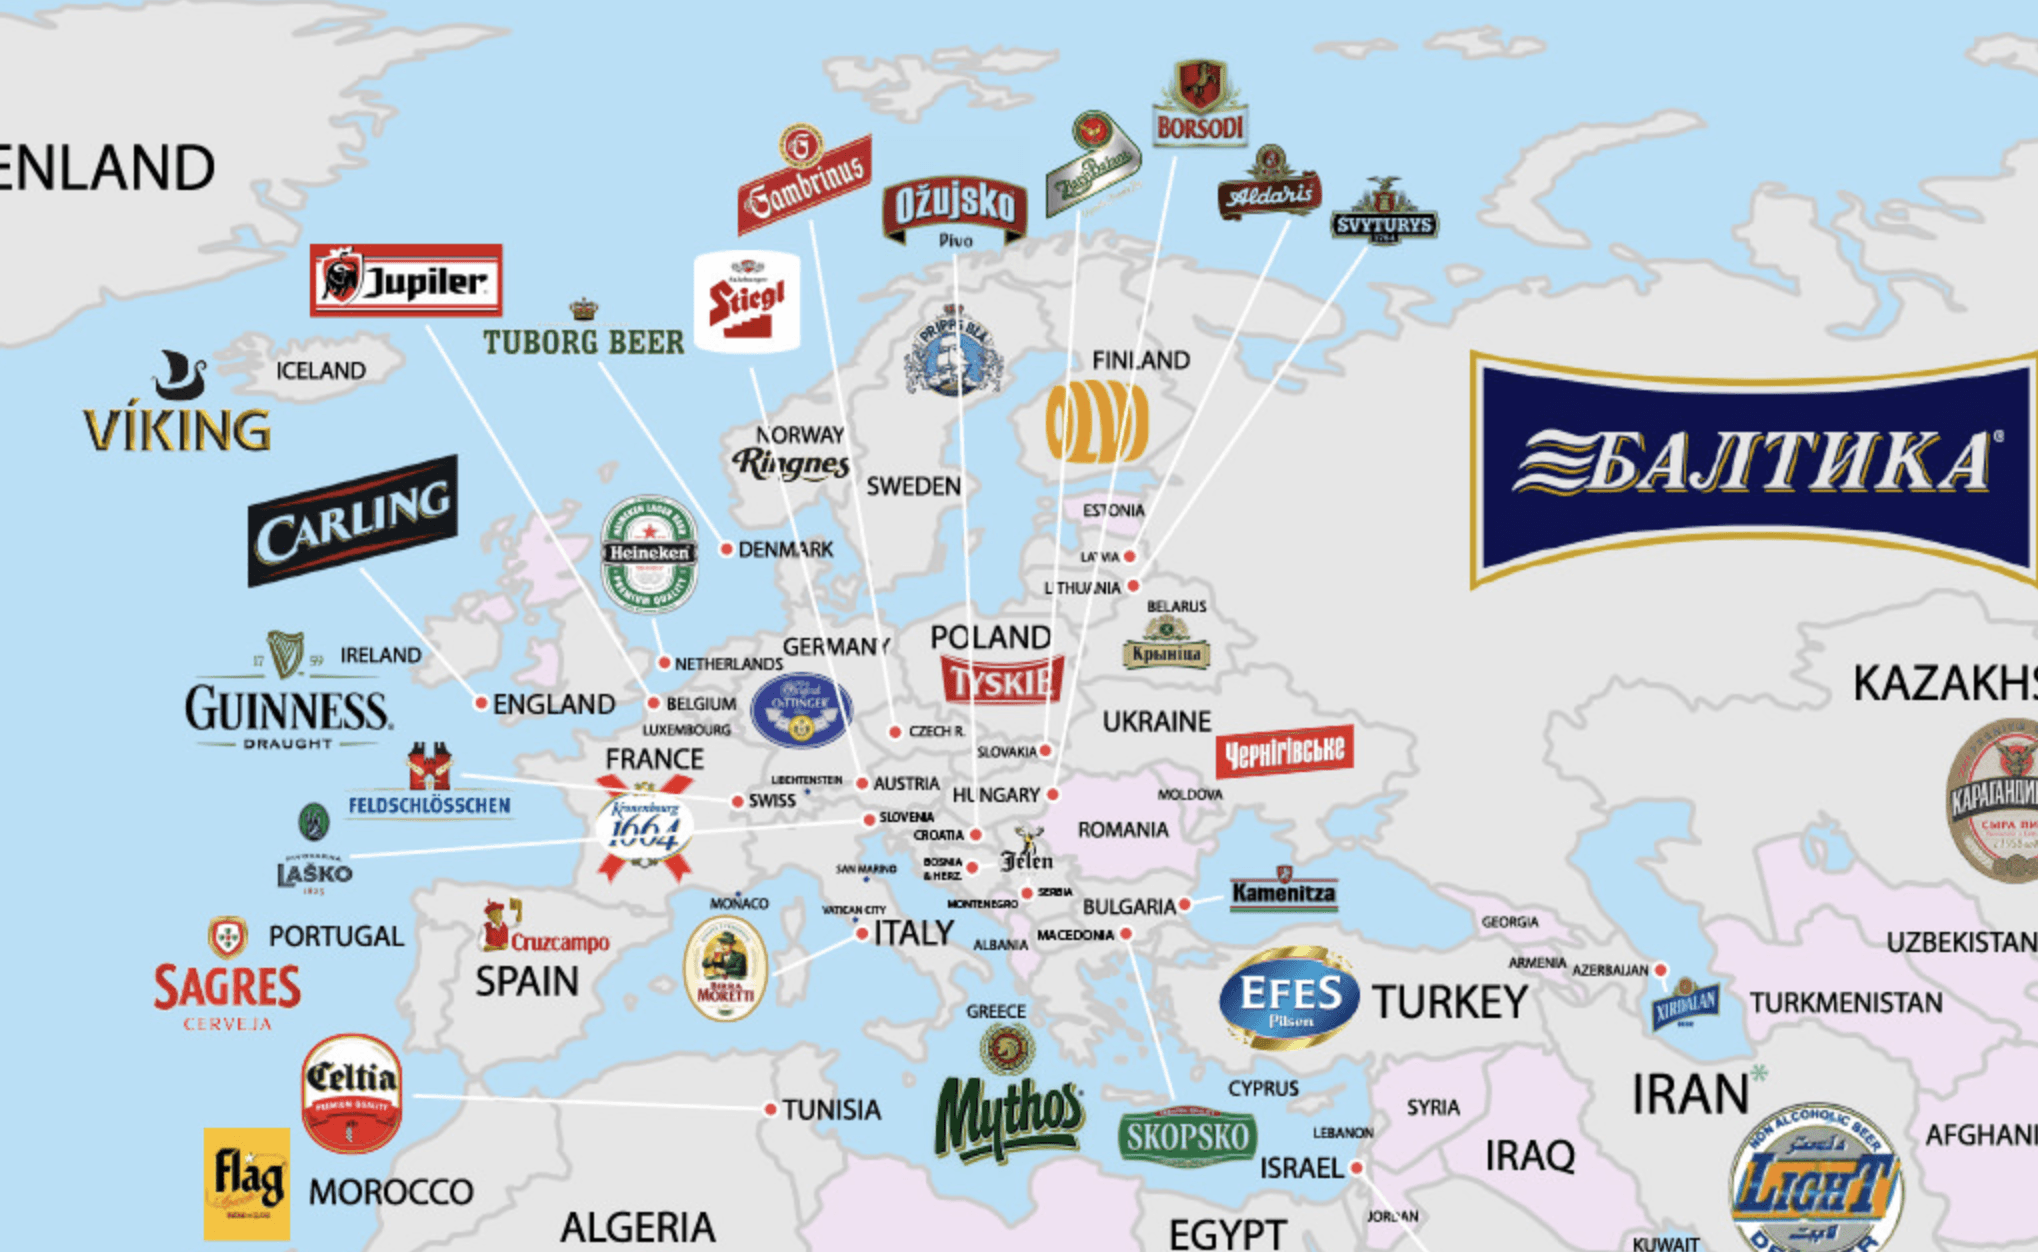 Most Famous Beer Logo - Most popular Beer, in every European country to